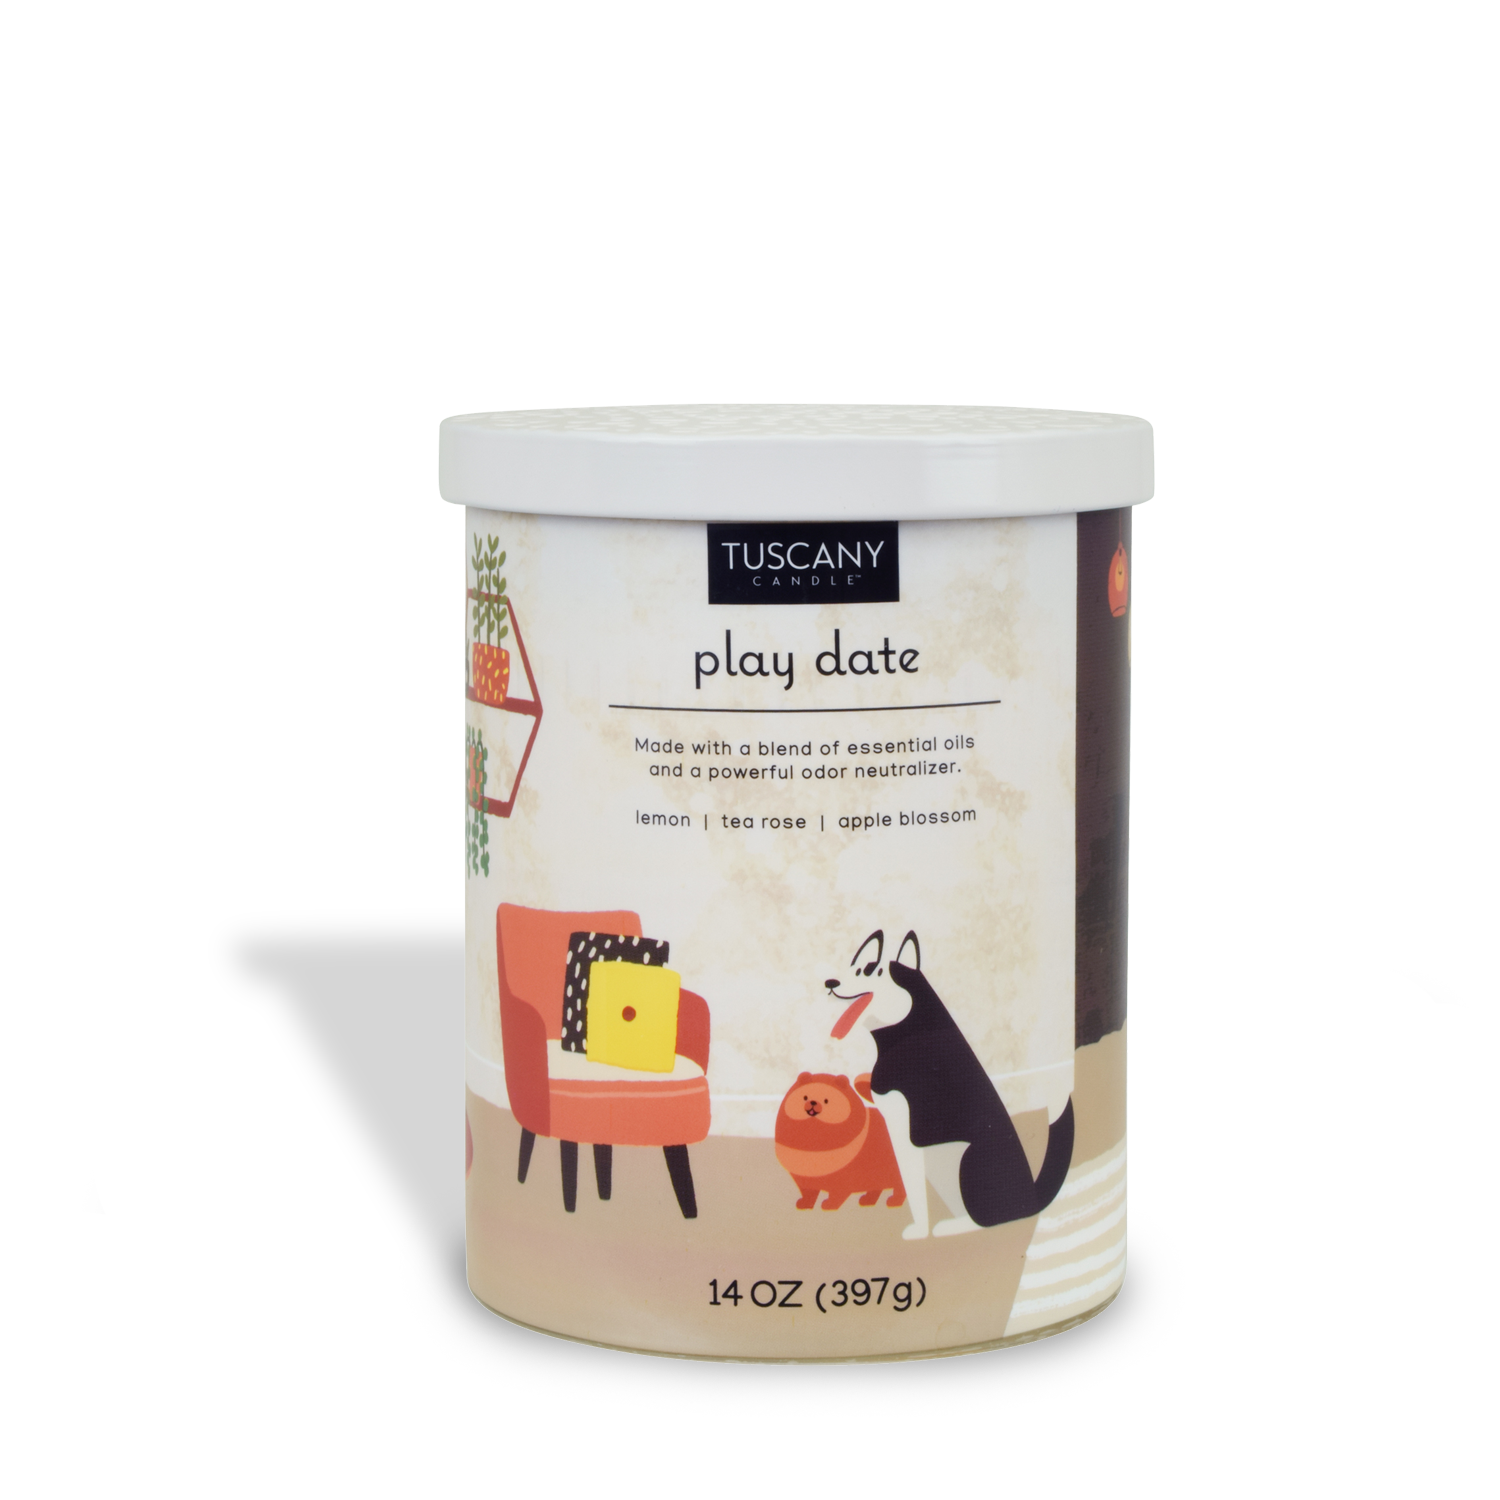 A tin of Play Date Scented Jar Candle (14 oz) - Pet Odor Control Collection by Tuscany Candle on a white surface, neutralizes pet odors.